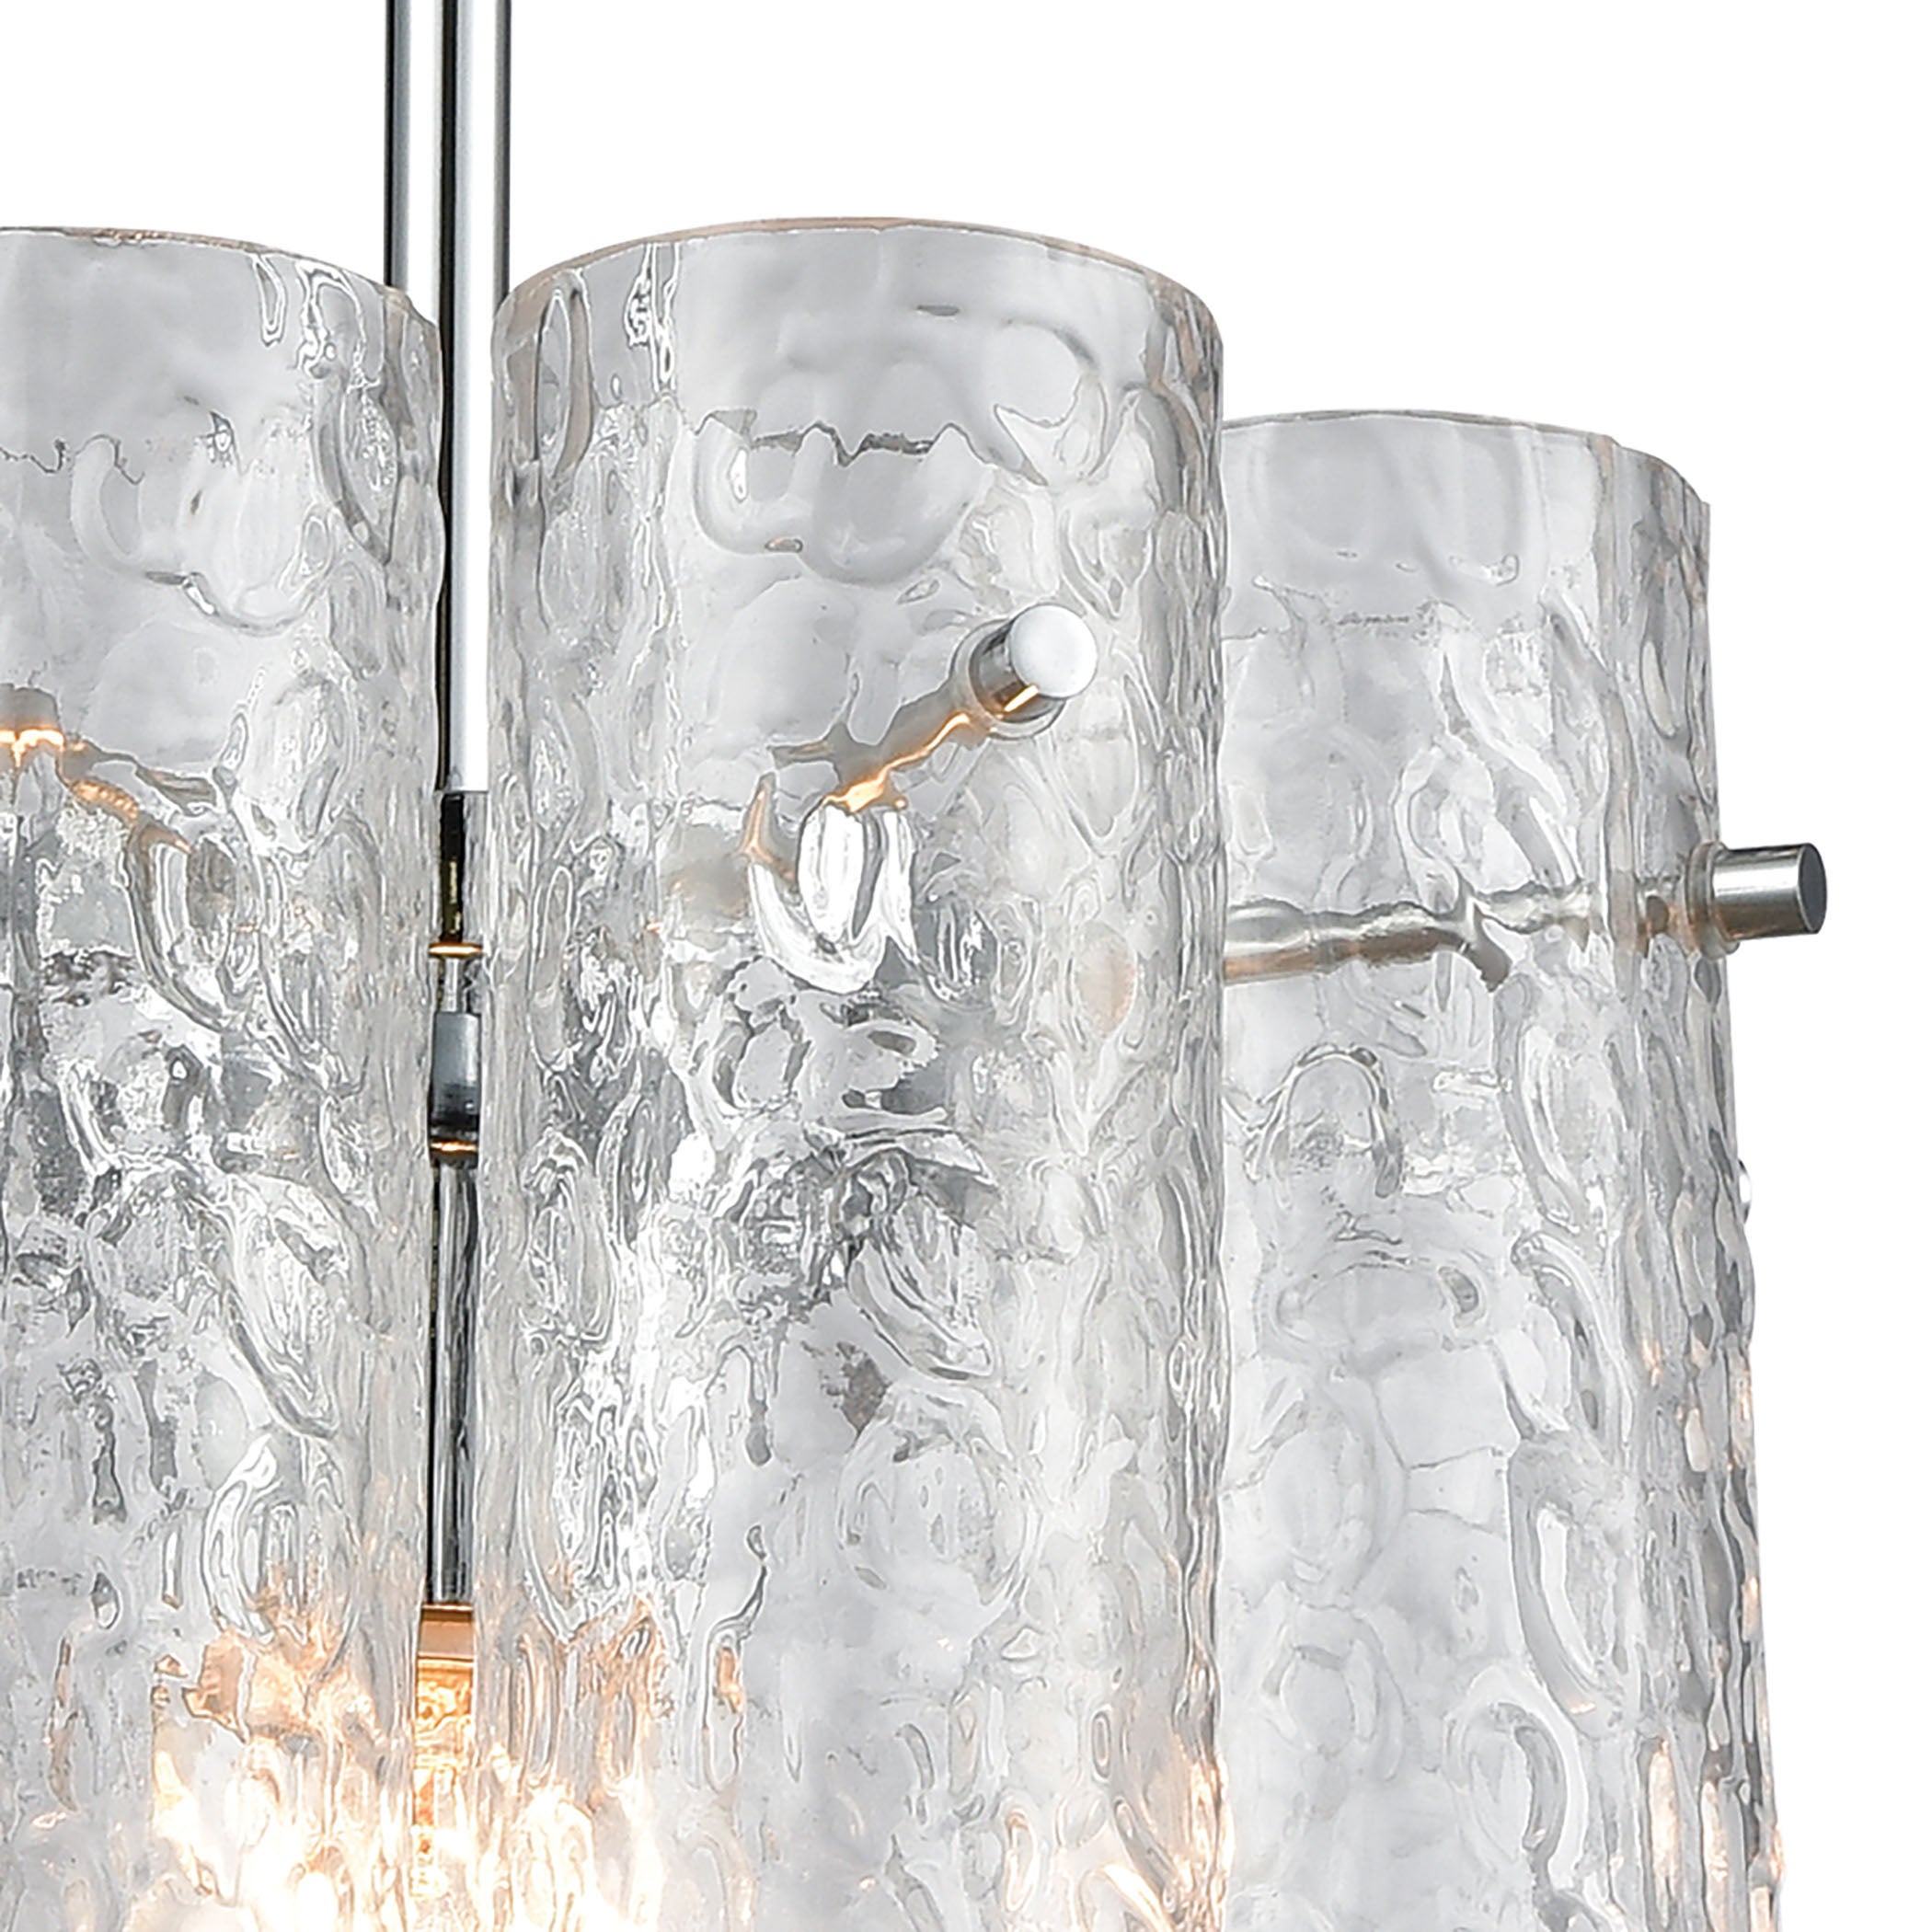 ELK Lighting 11911/1 Glass Symphony 1-Light Mini Pendant in Polished Chrome with Clear Textured Glass Cylinders